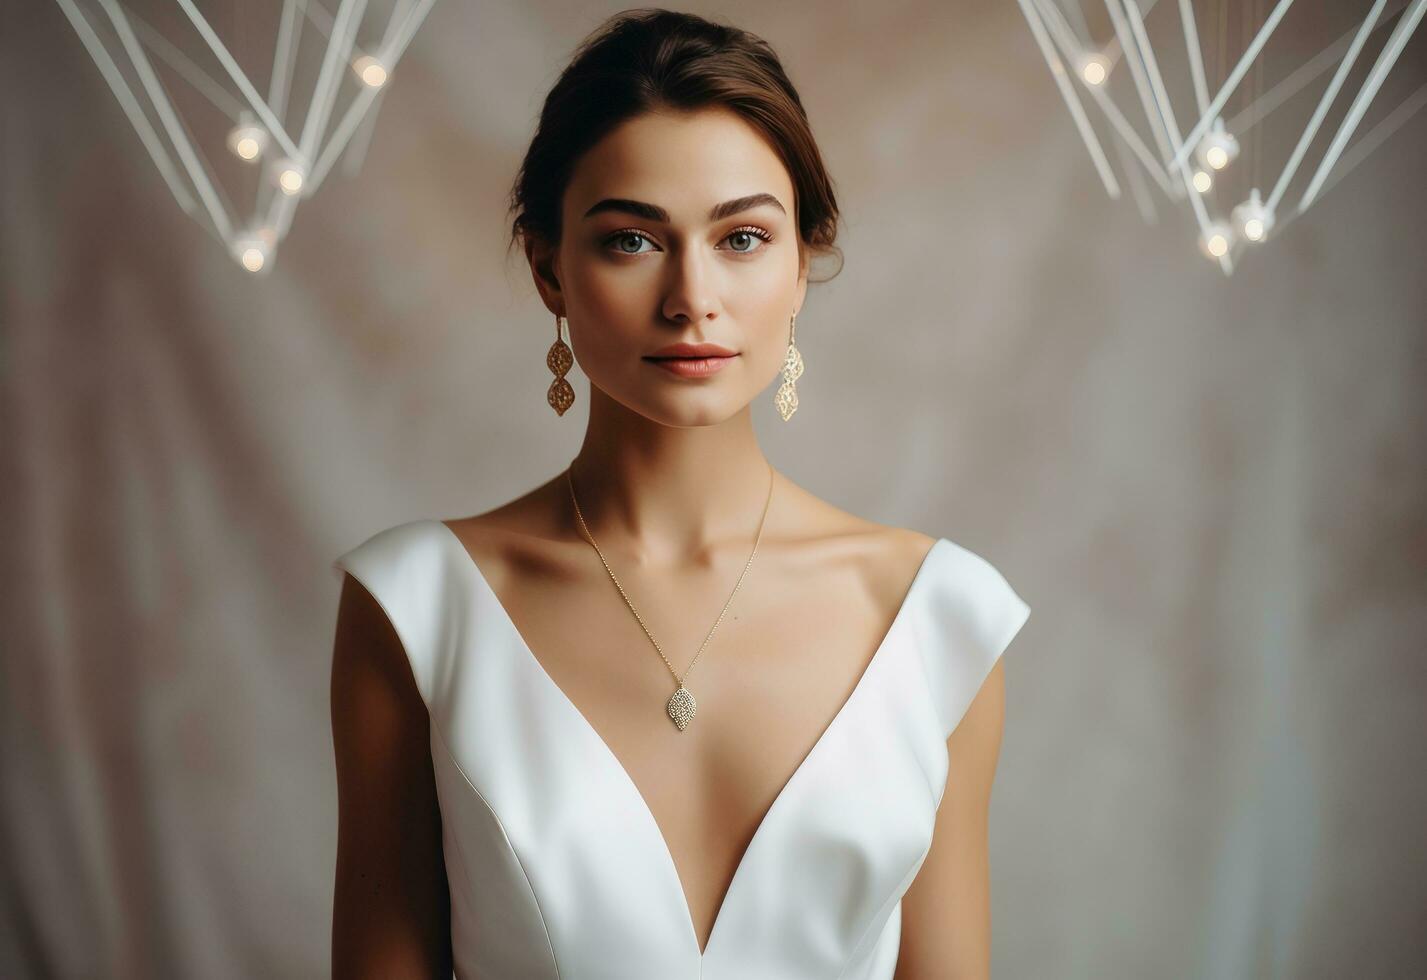 AI generated woman in a white dress with a necklace, posing for a portrait photo